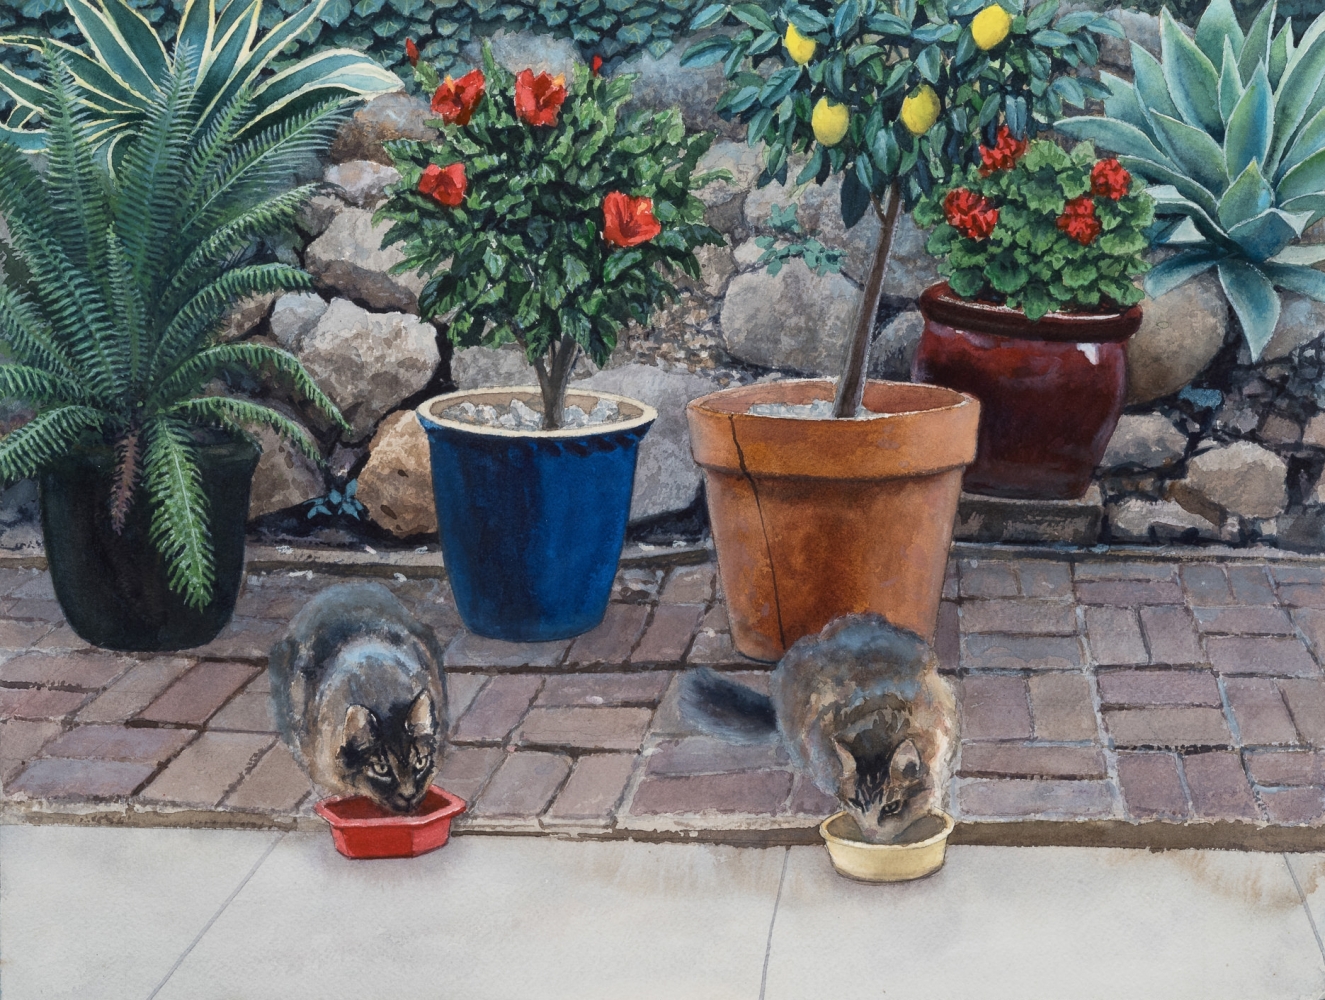 Tim Gardner

Two Cats Eating Breakfast

2020

Watercolor on paper

12 1/8 x 16 1/8 inches (30.8 x 41 cm)

Signed, dated verso

TG 590

INQUIRE